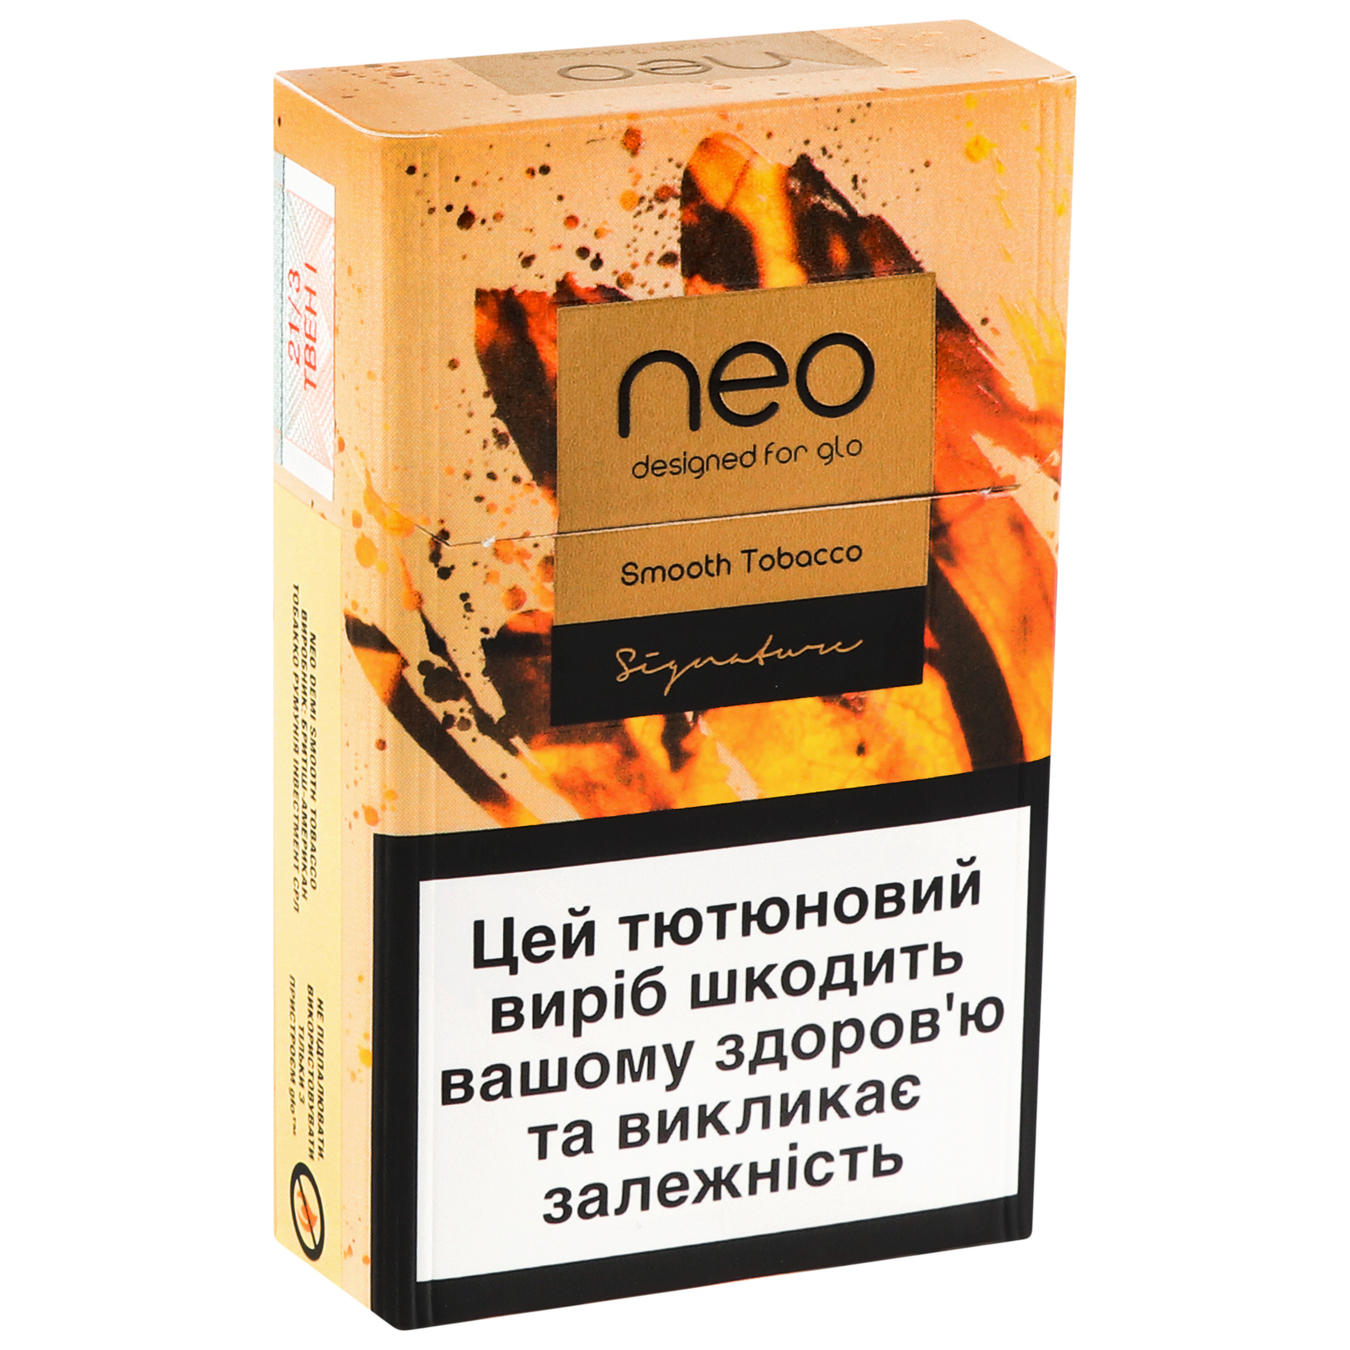 Sticks Neo Demi Smooth Tobbaco tobacco-containing 20pcs (the price is indicated without excise tax) 2